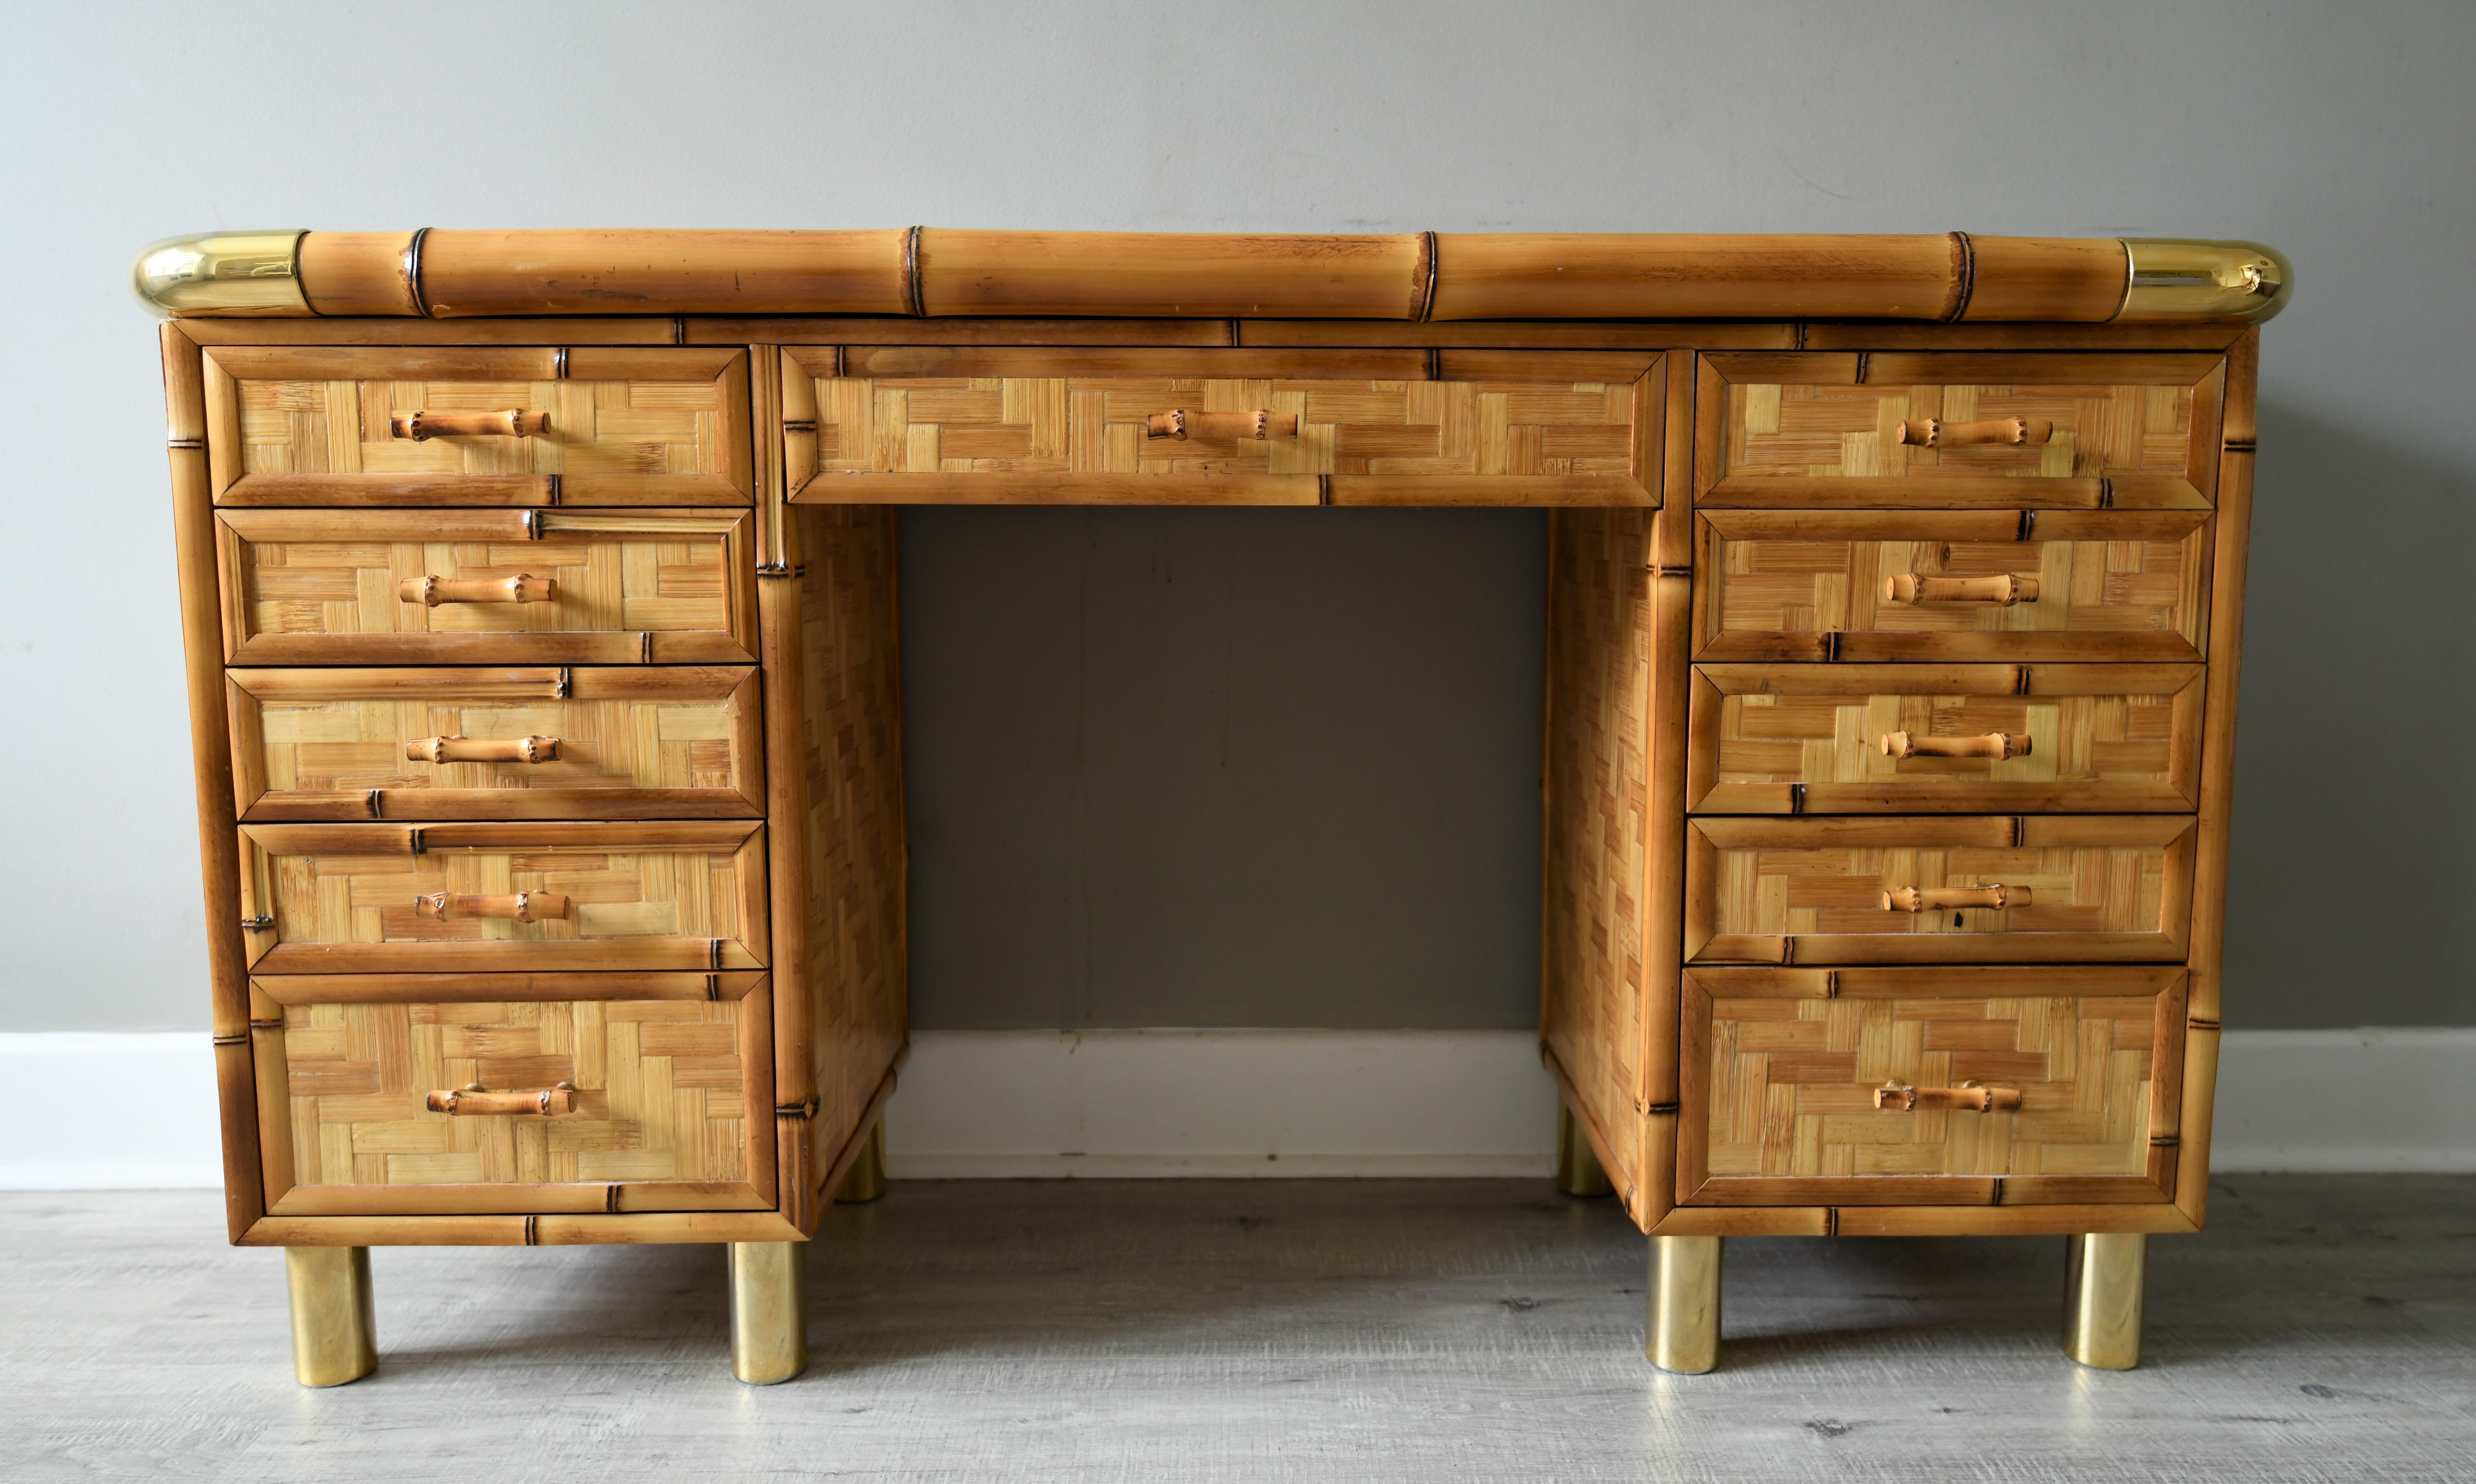 A bedroom set that defines. Bedroom jewelry at its best.
We have a Pair of Italian mid-century bamboo, “Parquetry” night stands, With a matching 9-drawer vanity it’s superb quality, with one wide central drawer and 4 either side. 

Exceptional